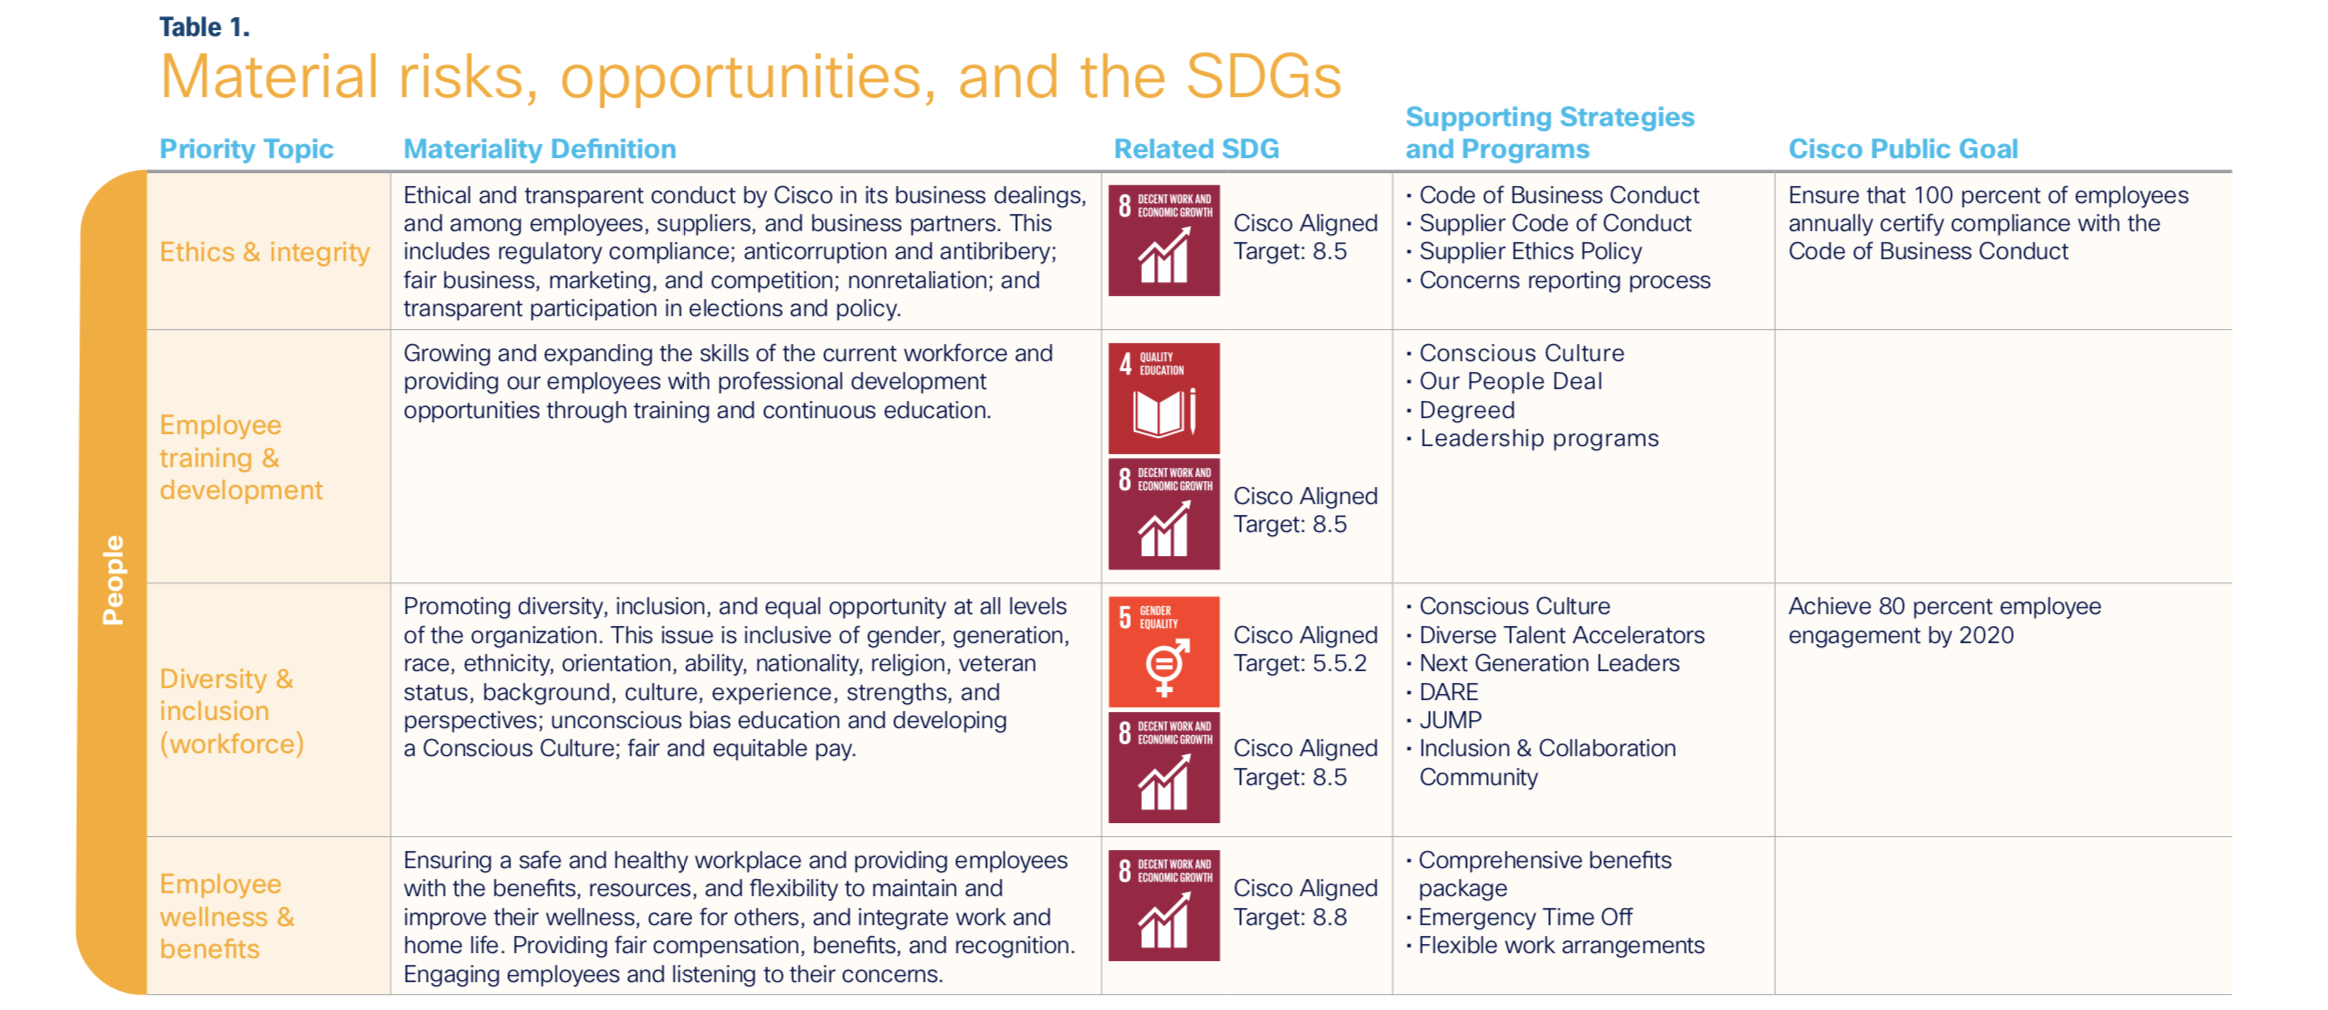 Material risks, opportunities, and the SDGs